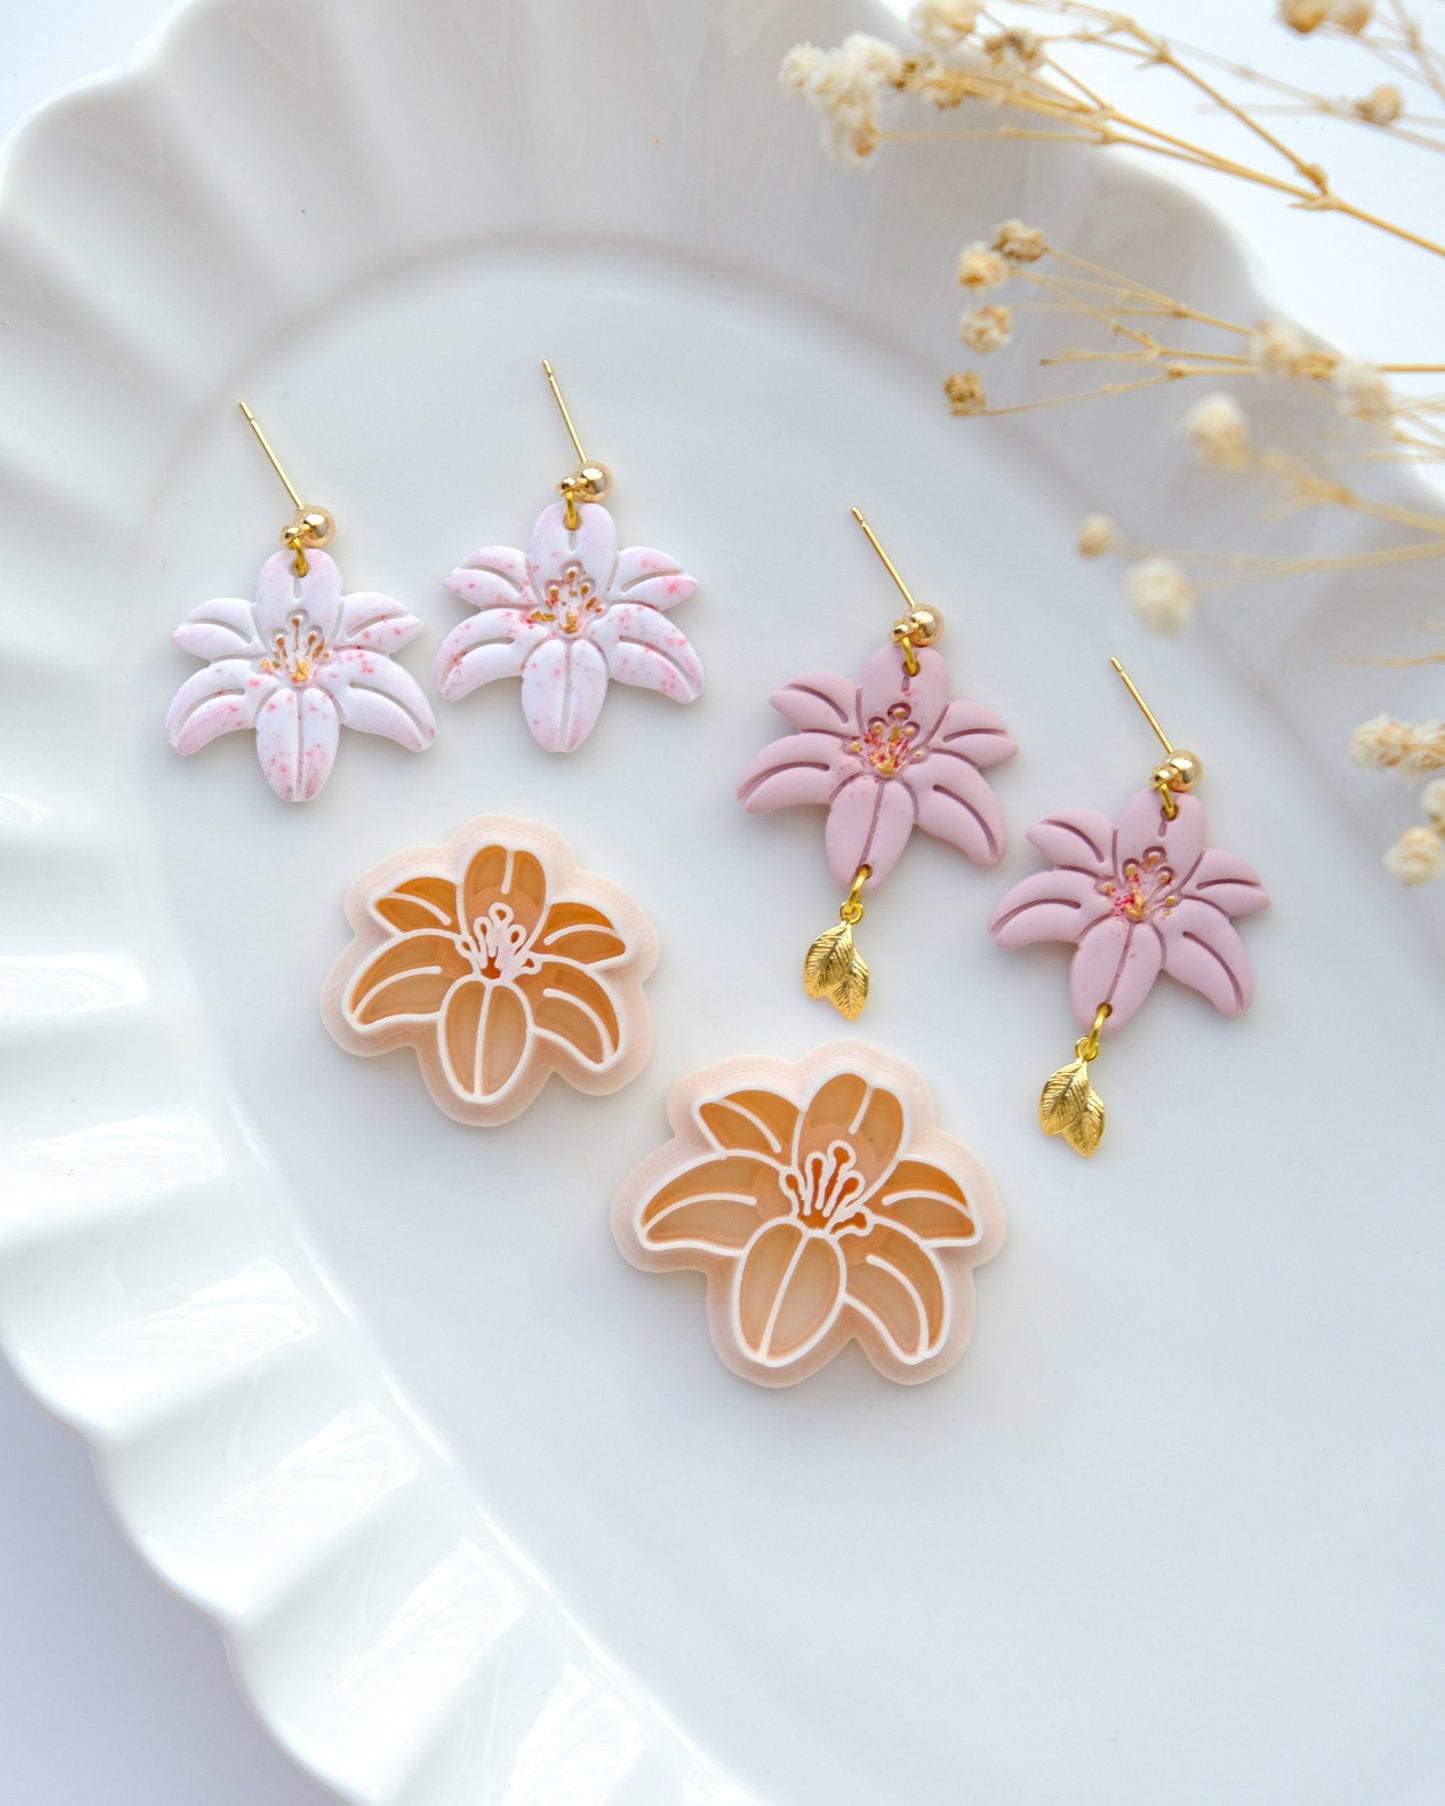 Lily Flower Polymer Clay Cutter | Spring Clay Cutter | Floral Clay Cutters | Clay Earring Cutter